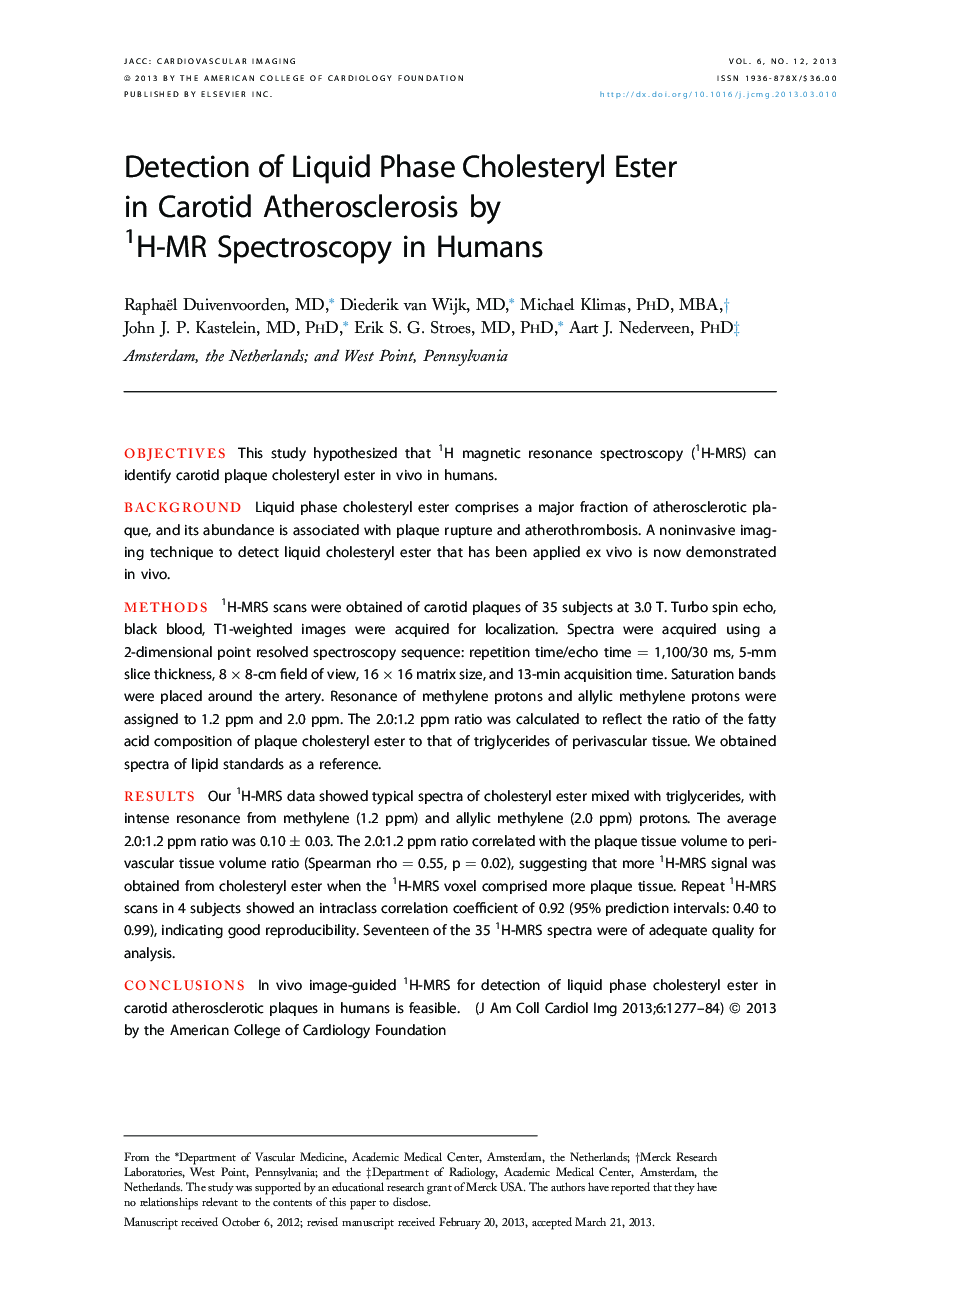 Detection of Liquid Phase Cholesteryl Ester in Carotid Atherosclerosis by 1H-MR Spectroscopy in Humans 